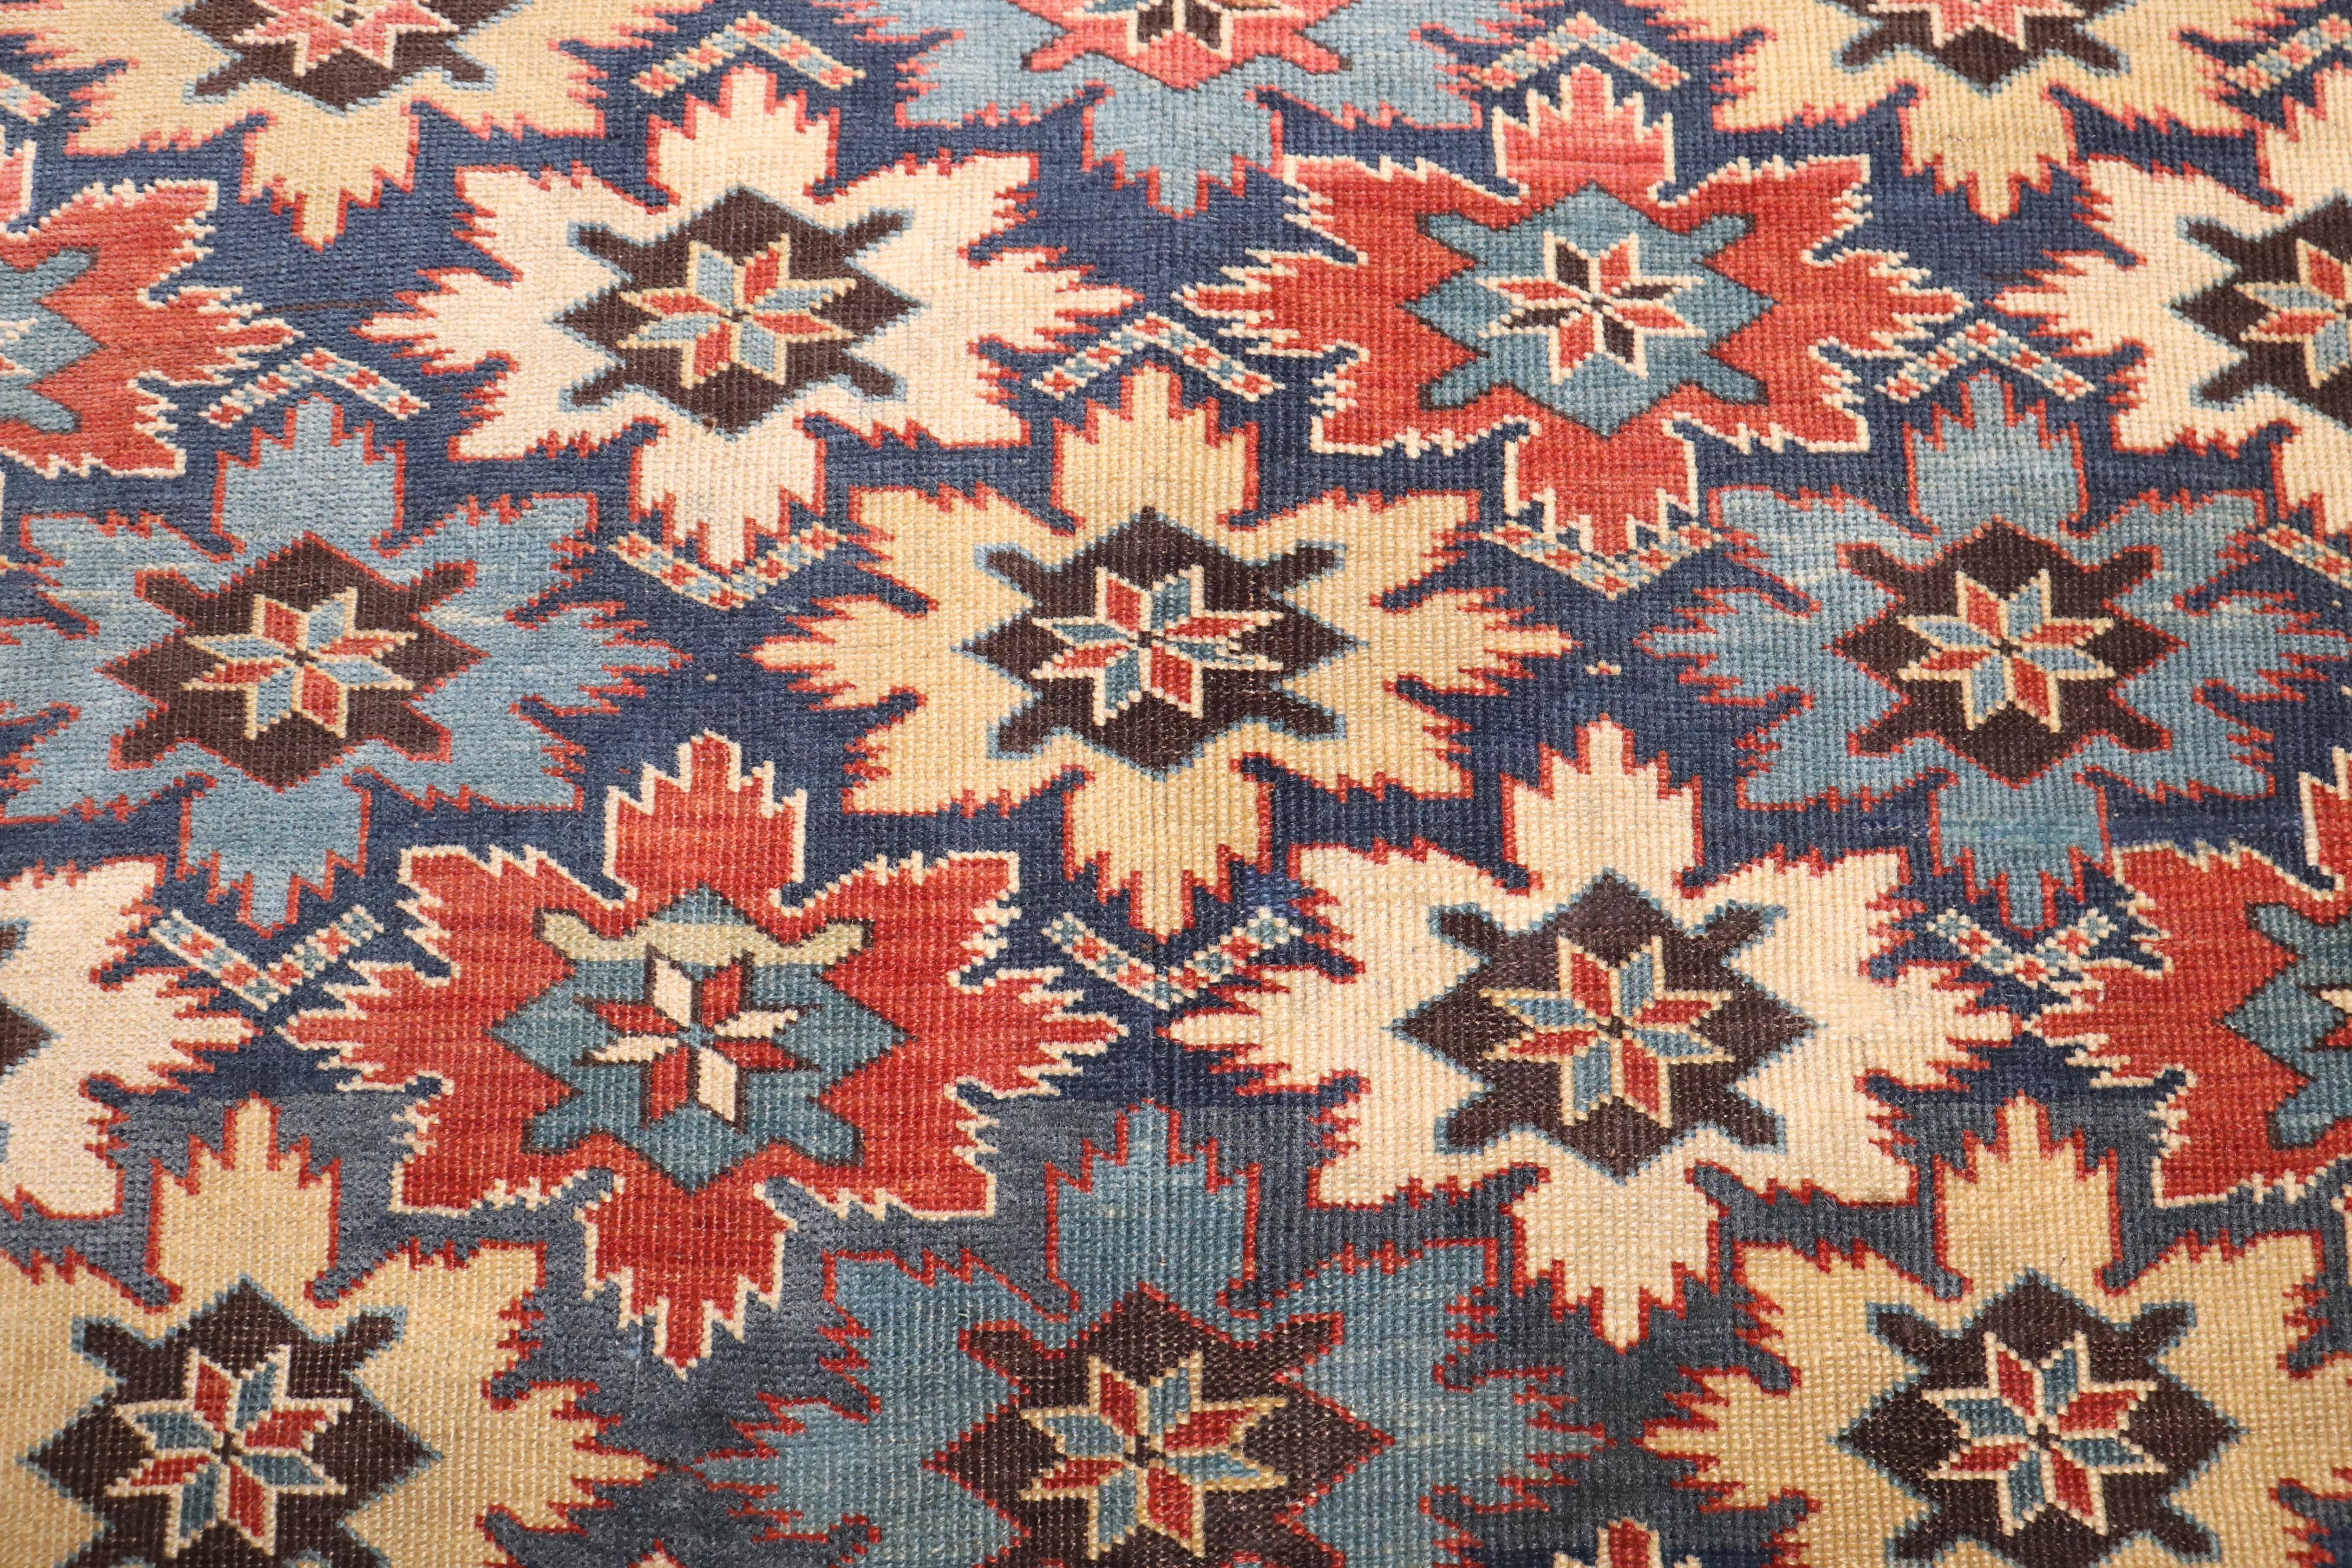 Superb antique Caucasian rKuba rug from the late 19th century with a rare all-over snowflake design.

Measures: 3'2